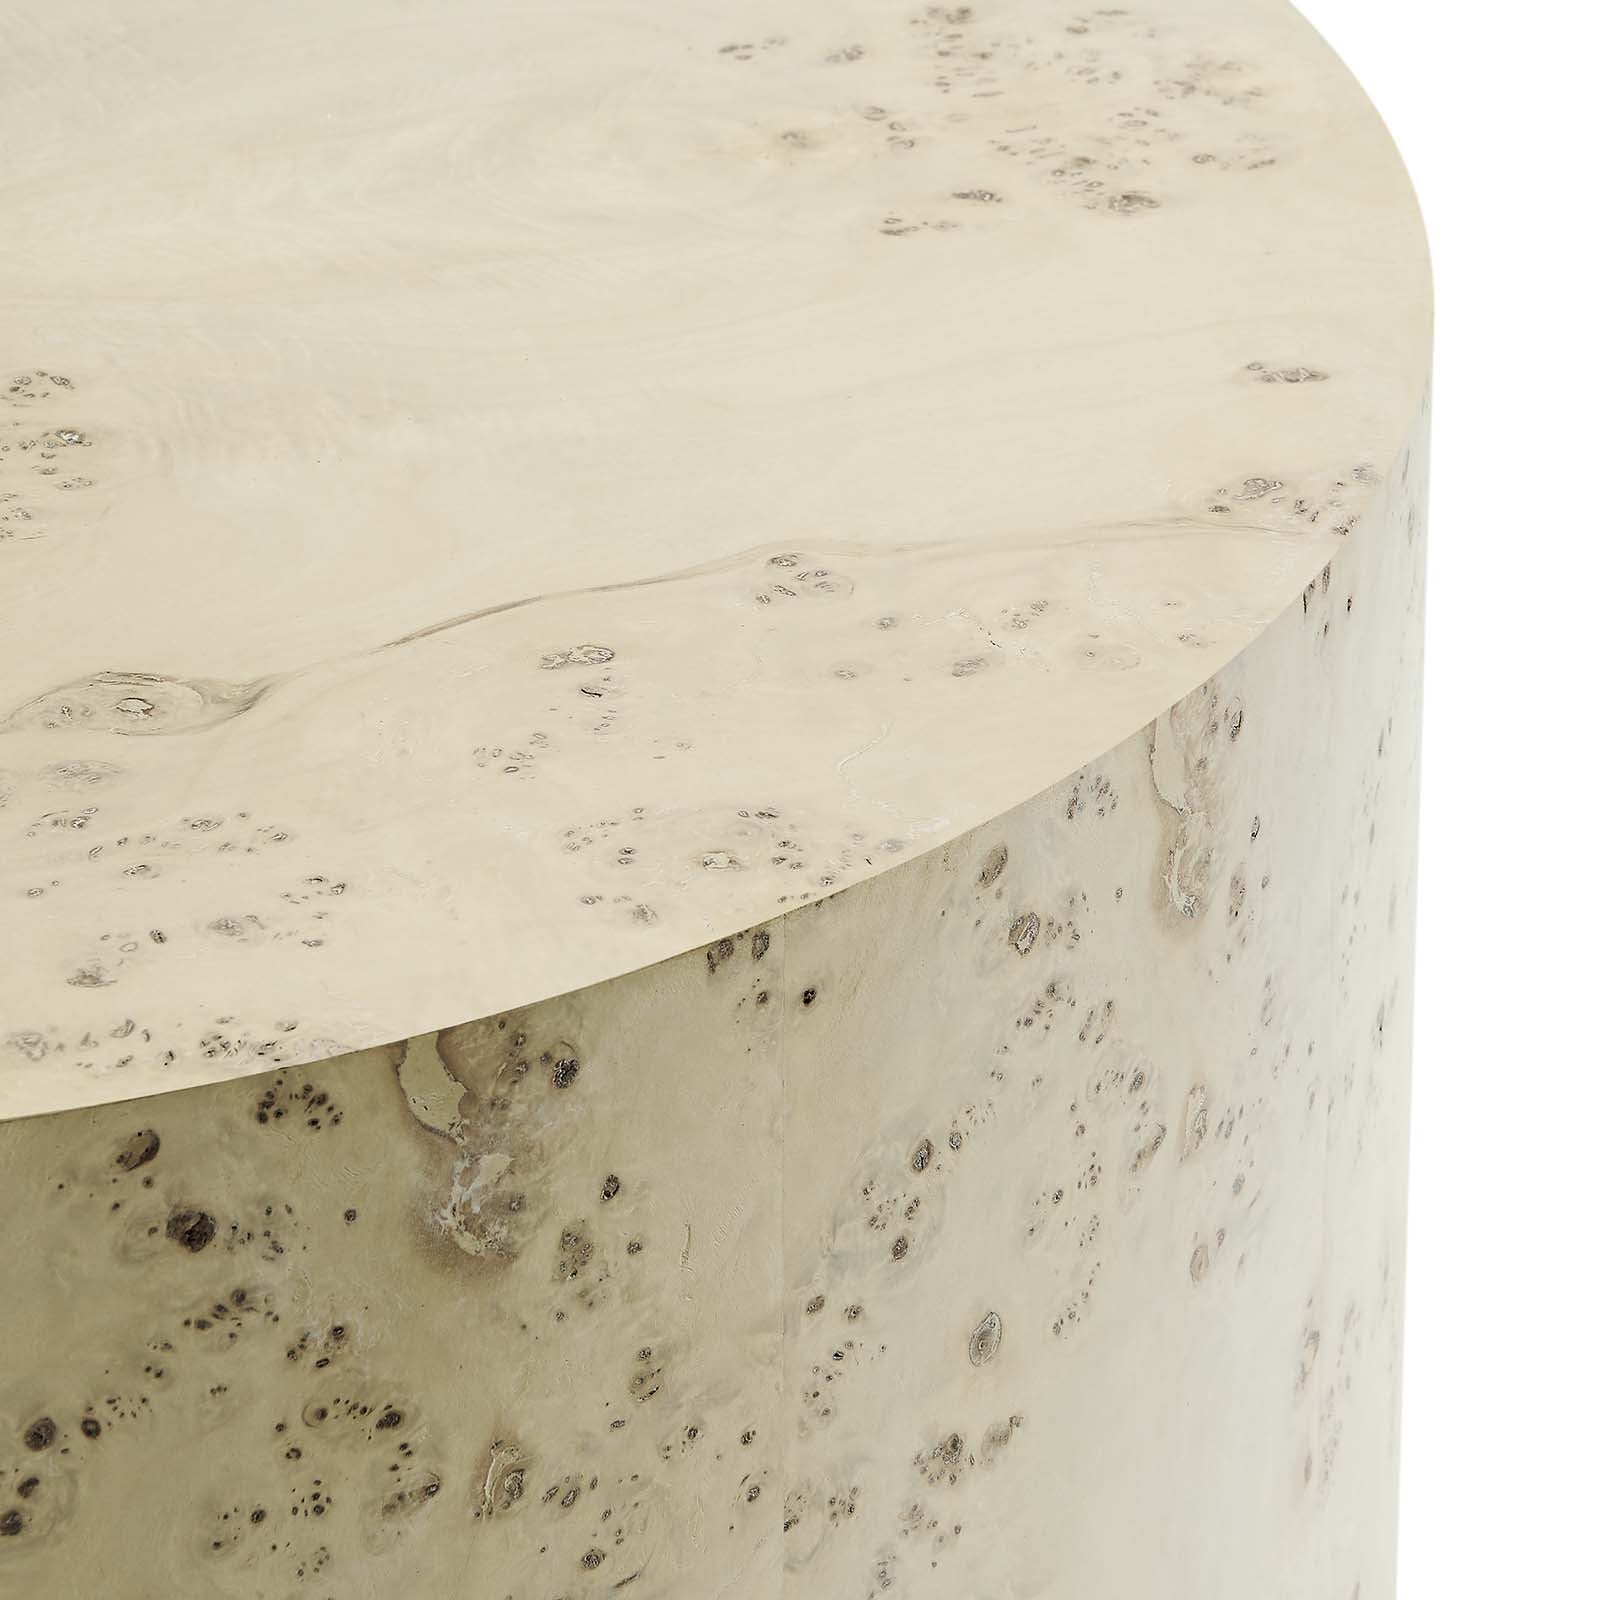 Cosmos 35" Round Burl Wood Coffee Table - East Shore Modern Home Furnishings